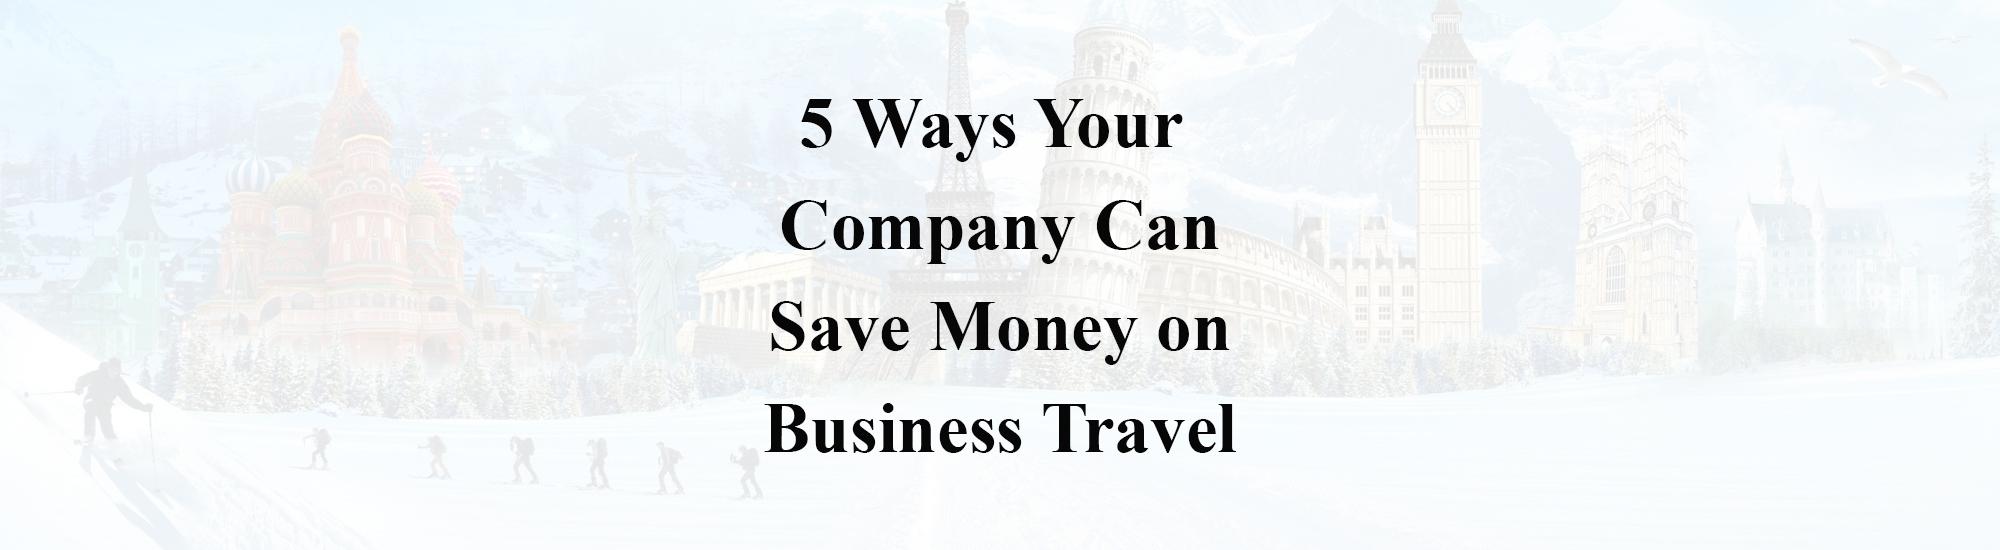 Save Money on Business Travel